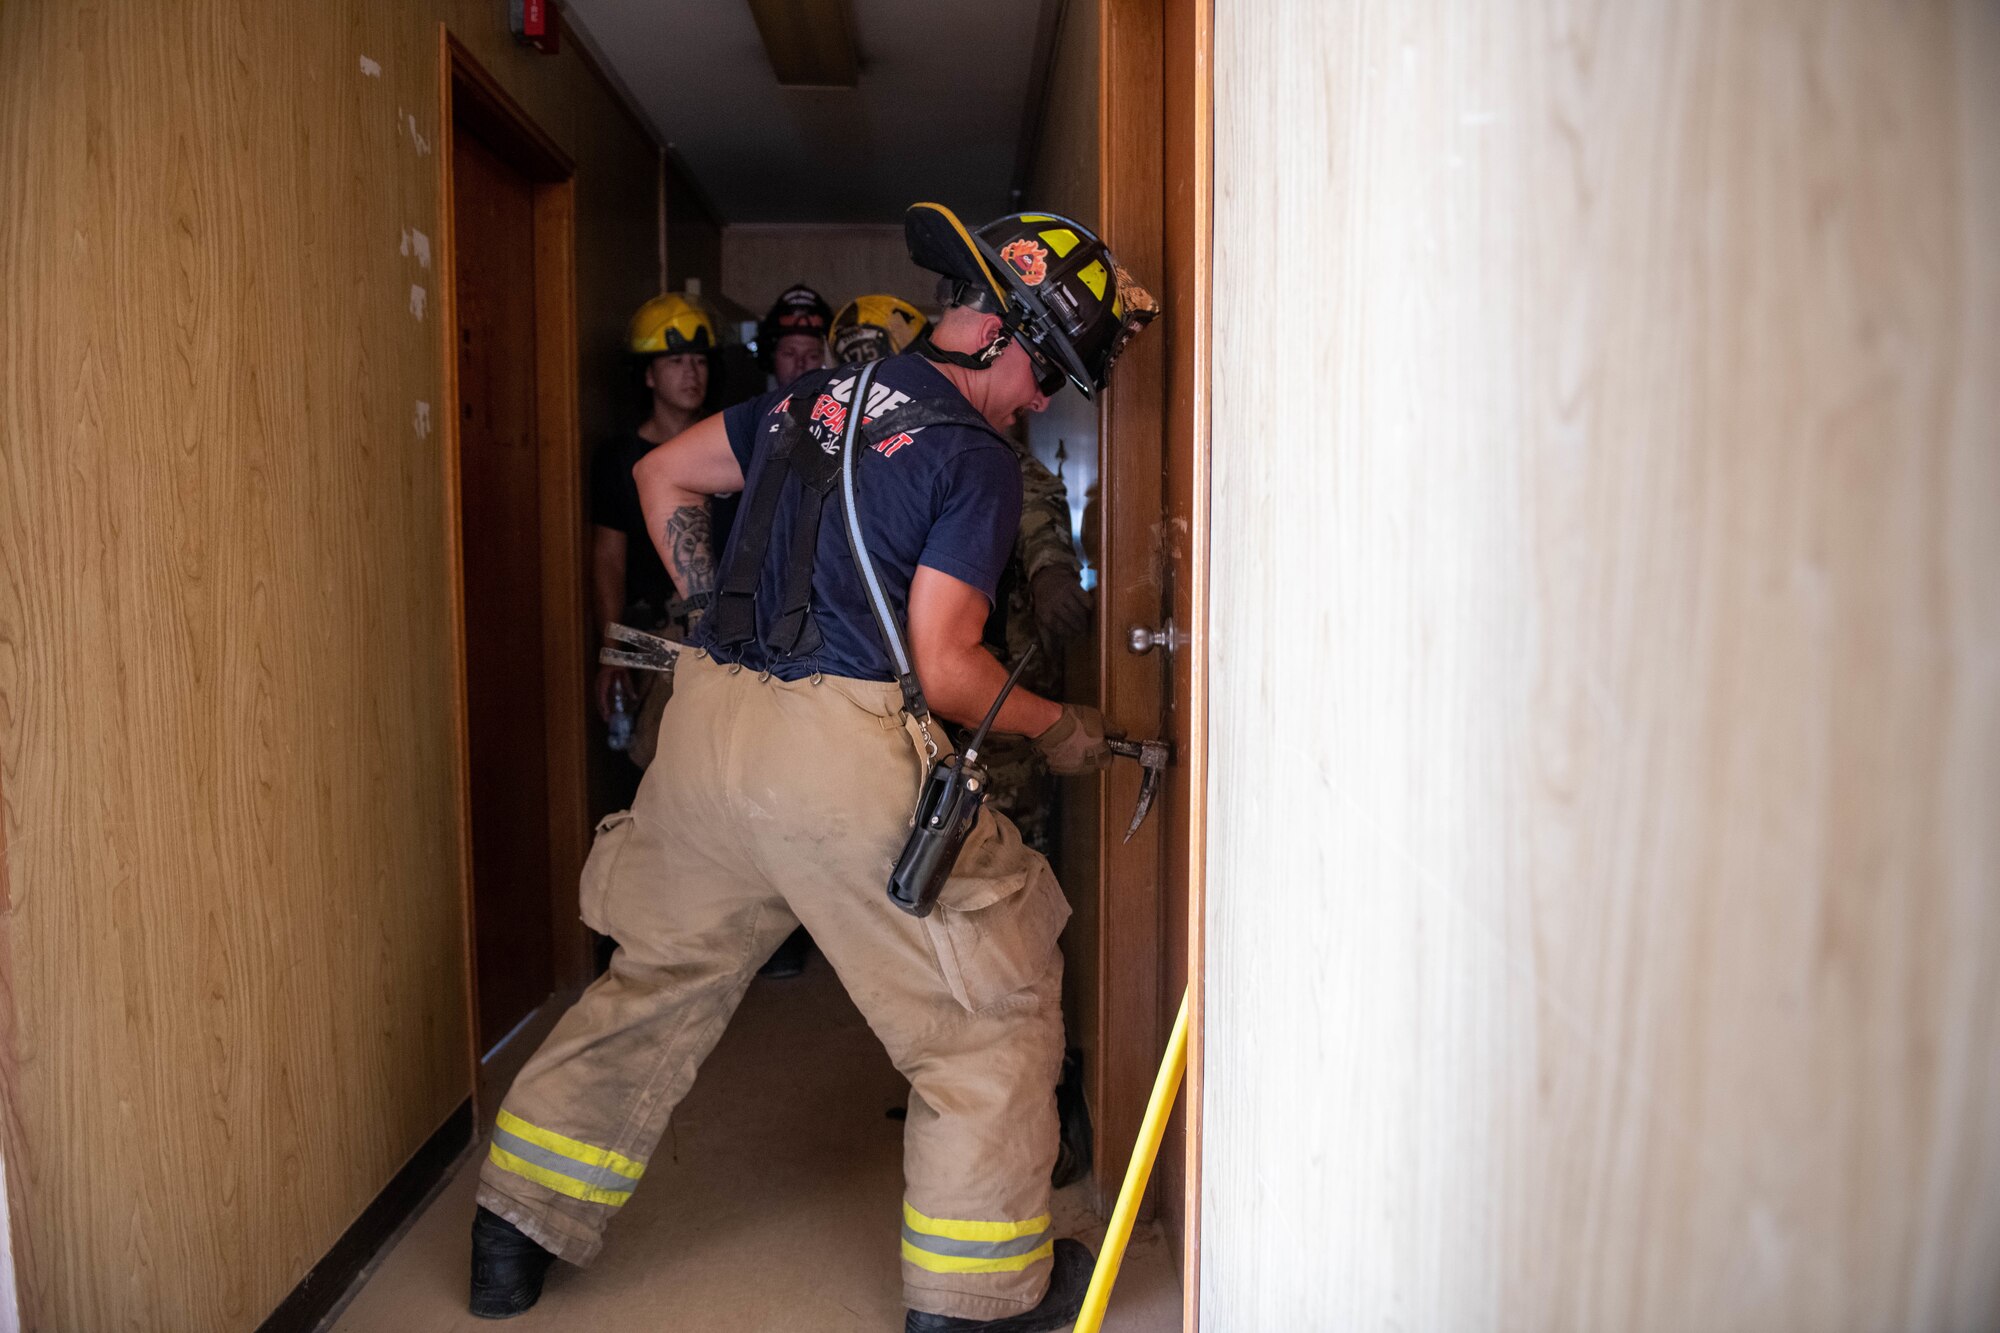 Firefighters with the 379th Expeditionary Civil Engineer Squadron break down a door during a forced entry exercise on Al Udeid Air Base, Qatar, Sept. 7, 2022. Doors in condemned trailers were bolted shut prior to the forced entry exercise. (U.S. Air National Guard photo by Airman 1st Class Constantine Bambakidis)